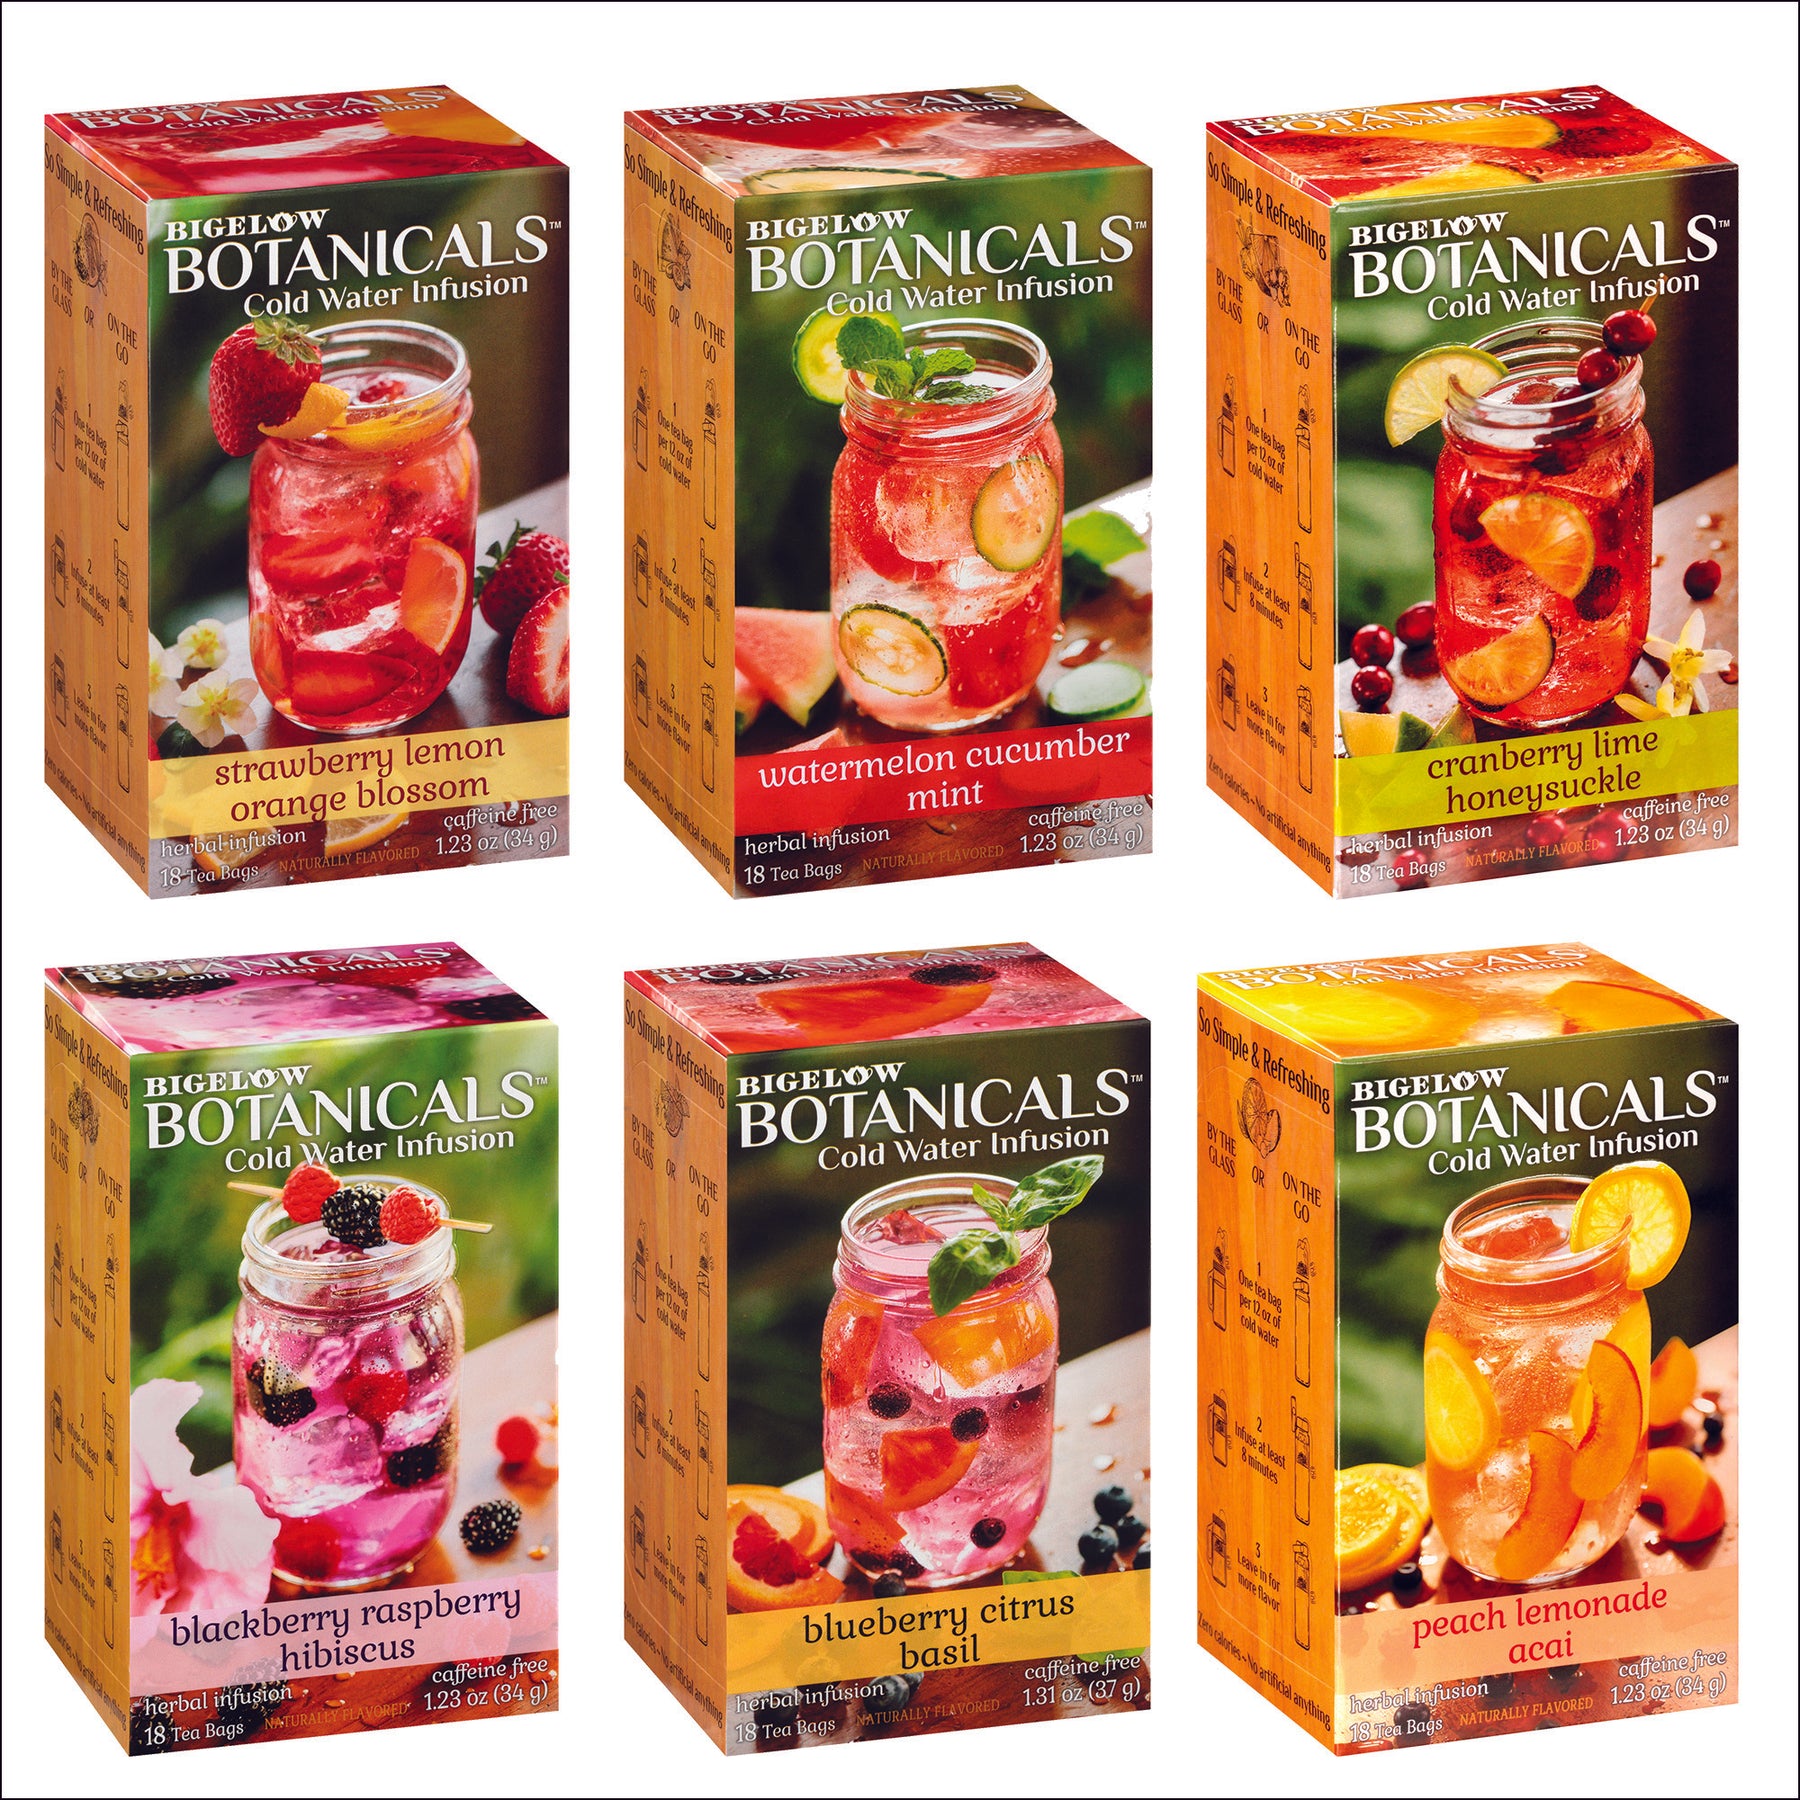 Mixed Case of Bigelow Botanicals - Case of 6 Boxes - Total of 108 teabags –  Bigelow Tea